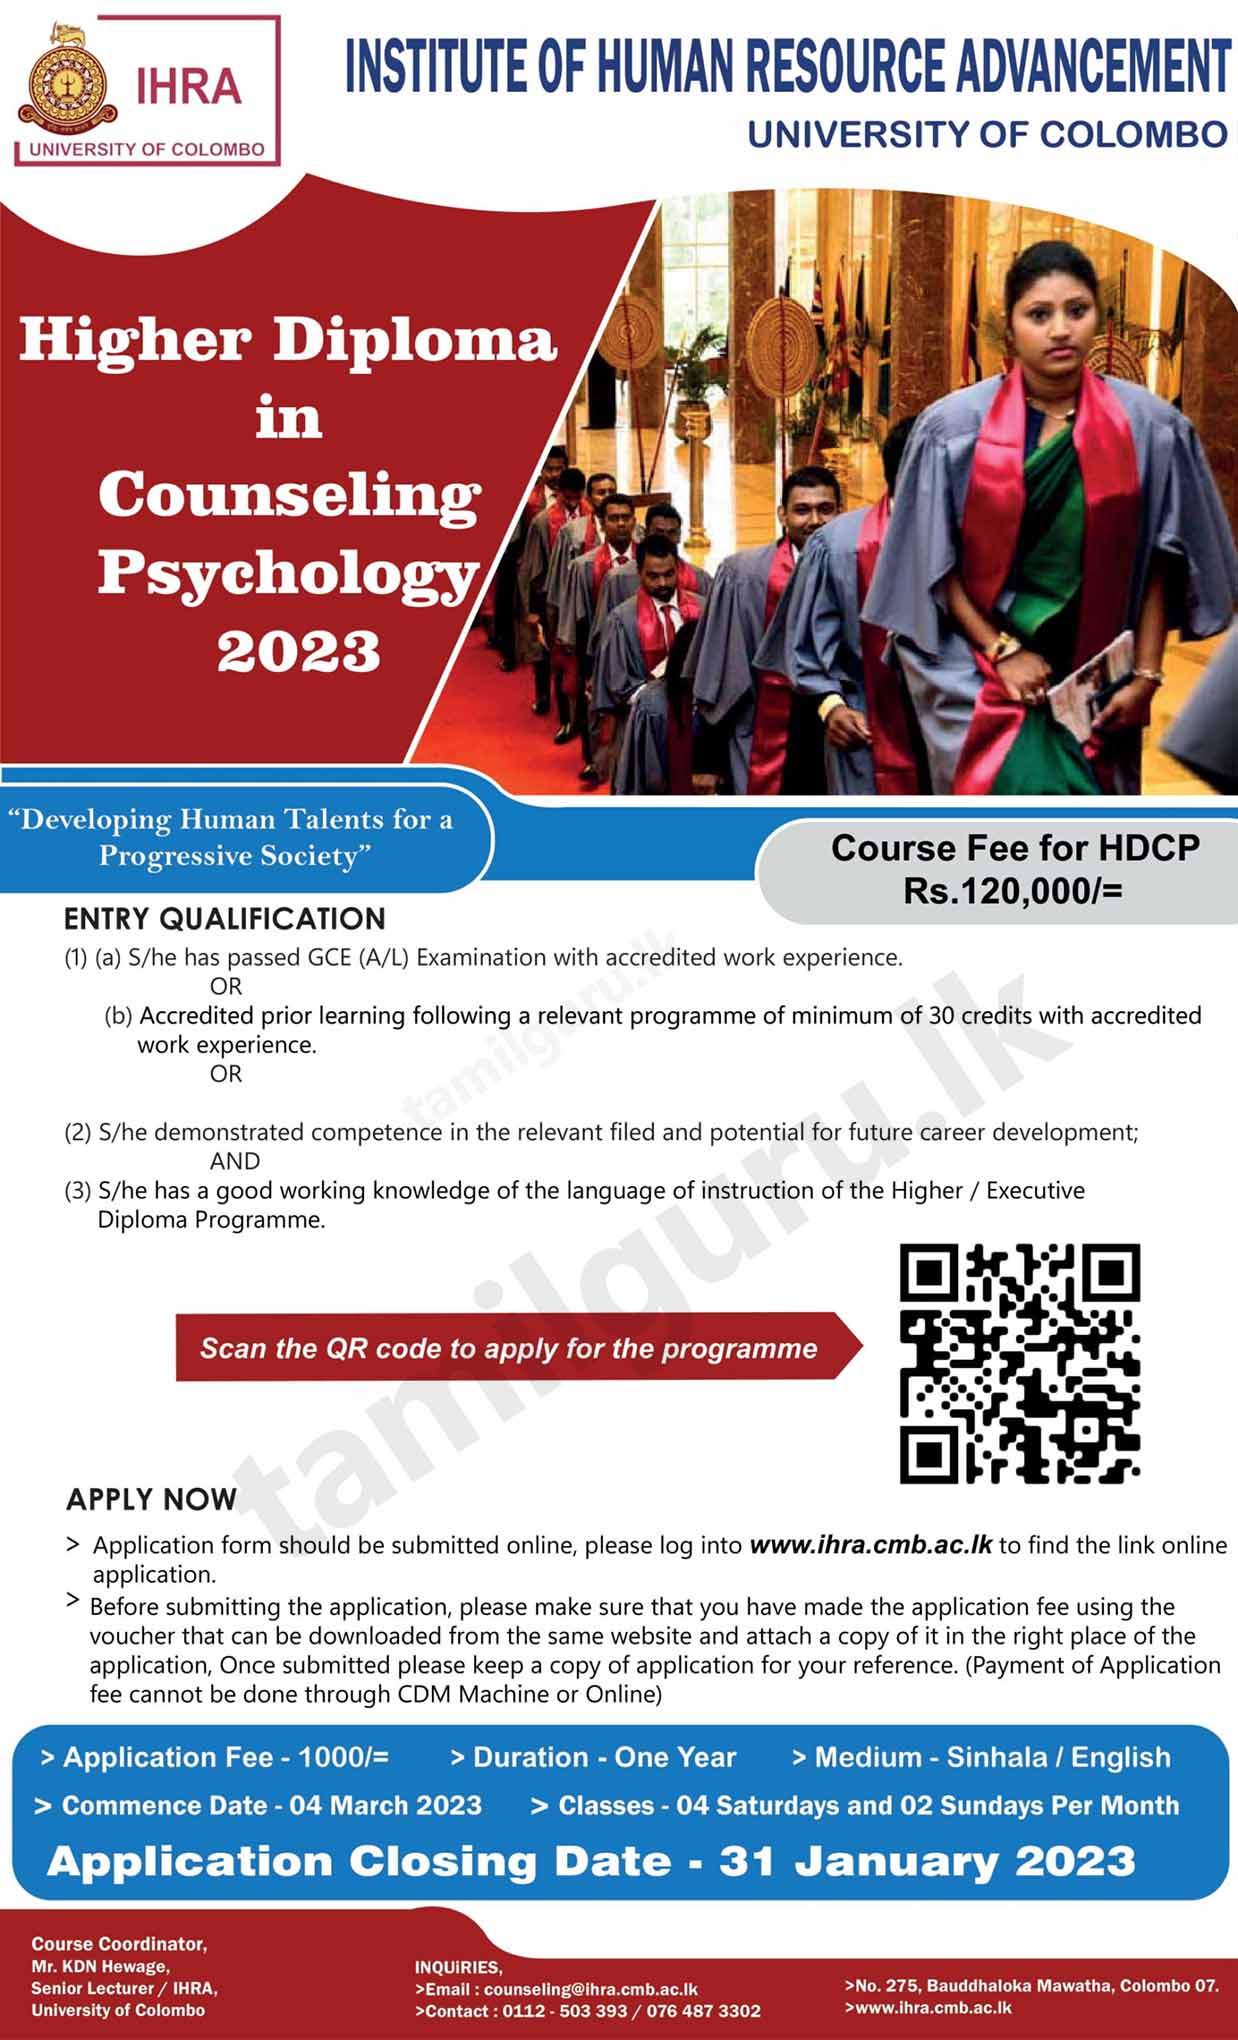 Calling Applications for Higher Diploma in Counselling Psychology (HDCP) 2023 - University of Colombo (IHRA)